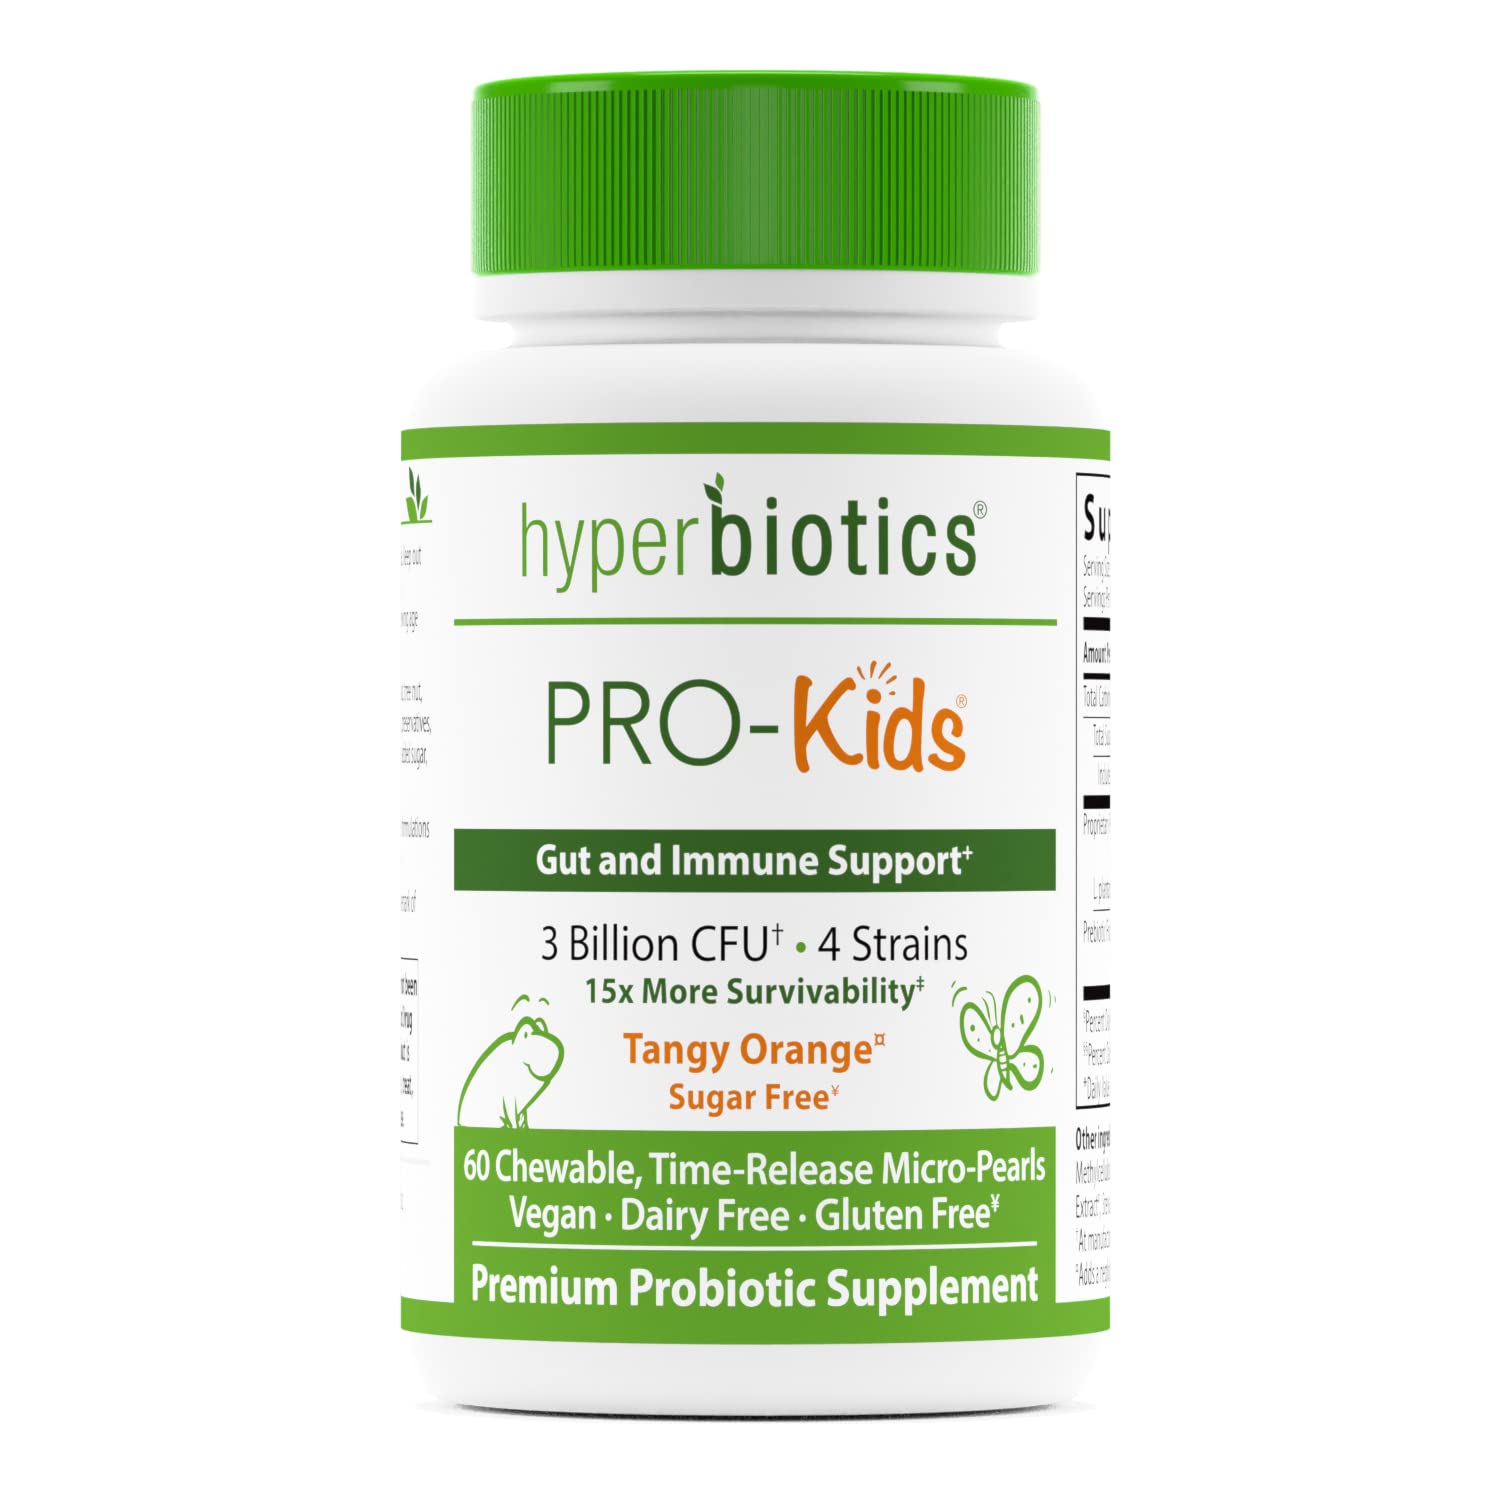 Hyperbiotics Pro Kids | Vegan Daily Digestive Probiotic for Kids | Tiny Pearl Tablets | Easy to Swallow for Children | Gluten, Dairy, Soy & Sugar Free | Ages 3 & Older | Orange Flavor | 60 Count